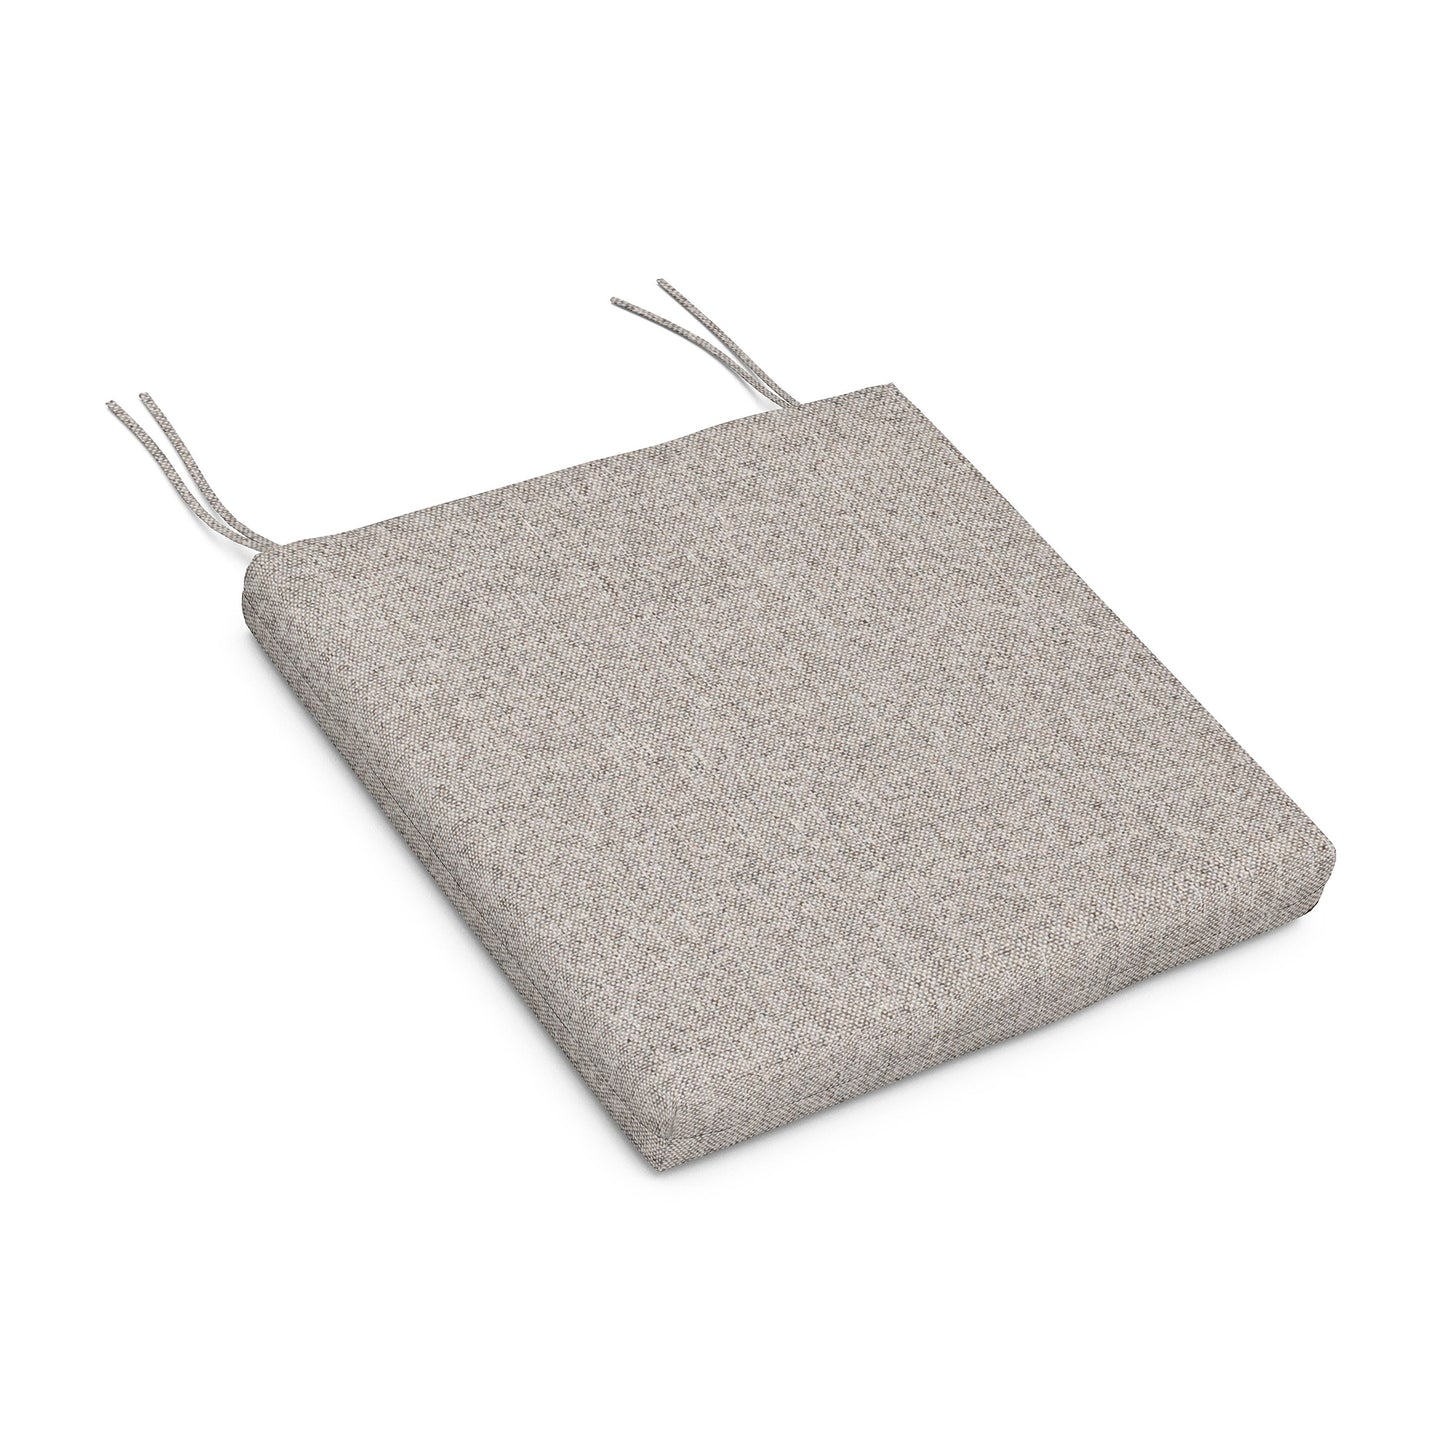 A light gray POLYWOOD® XPWS0008 - Seat Cushion with two ties on each side, displayed on a plain white background.